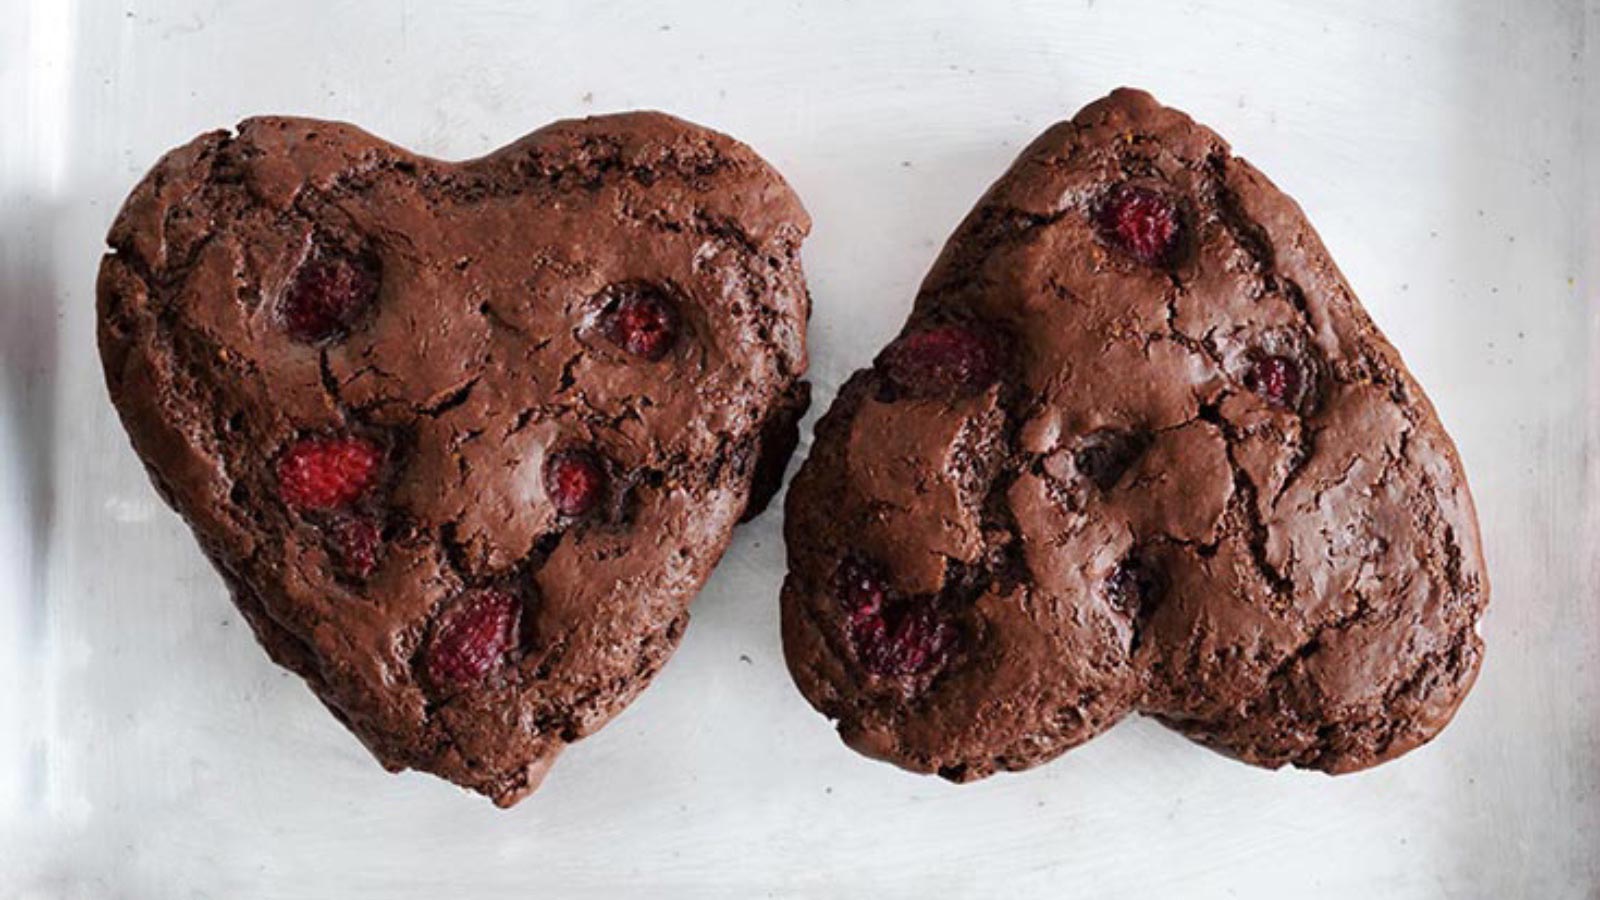 Two just-baked Healthy Chocolate Raspberry Cakes sitting on a sheet pan.